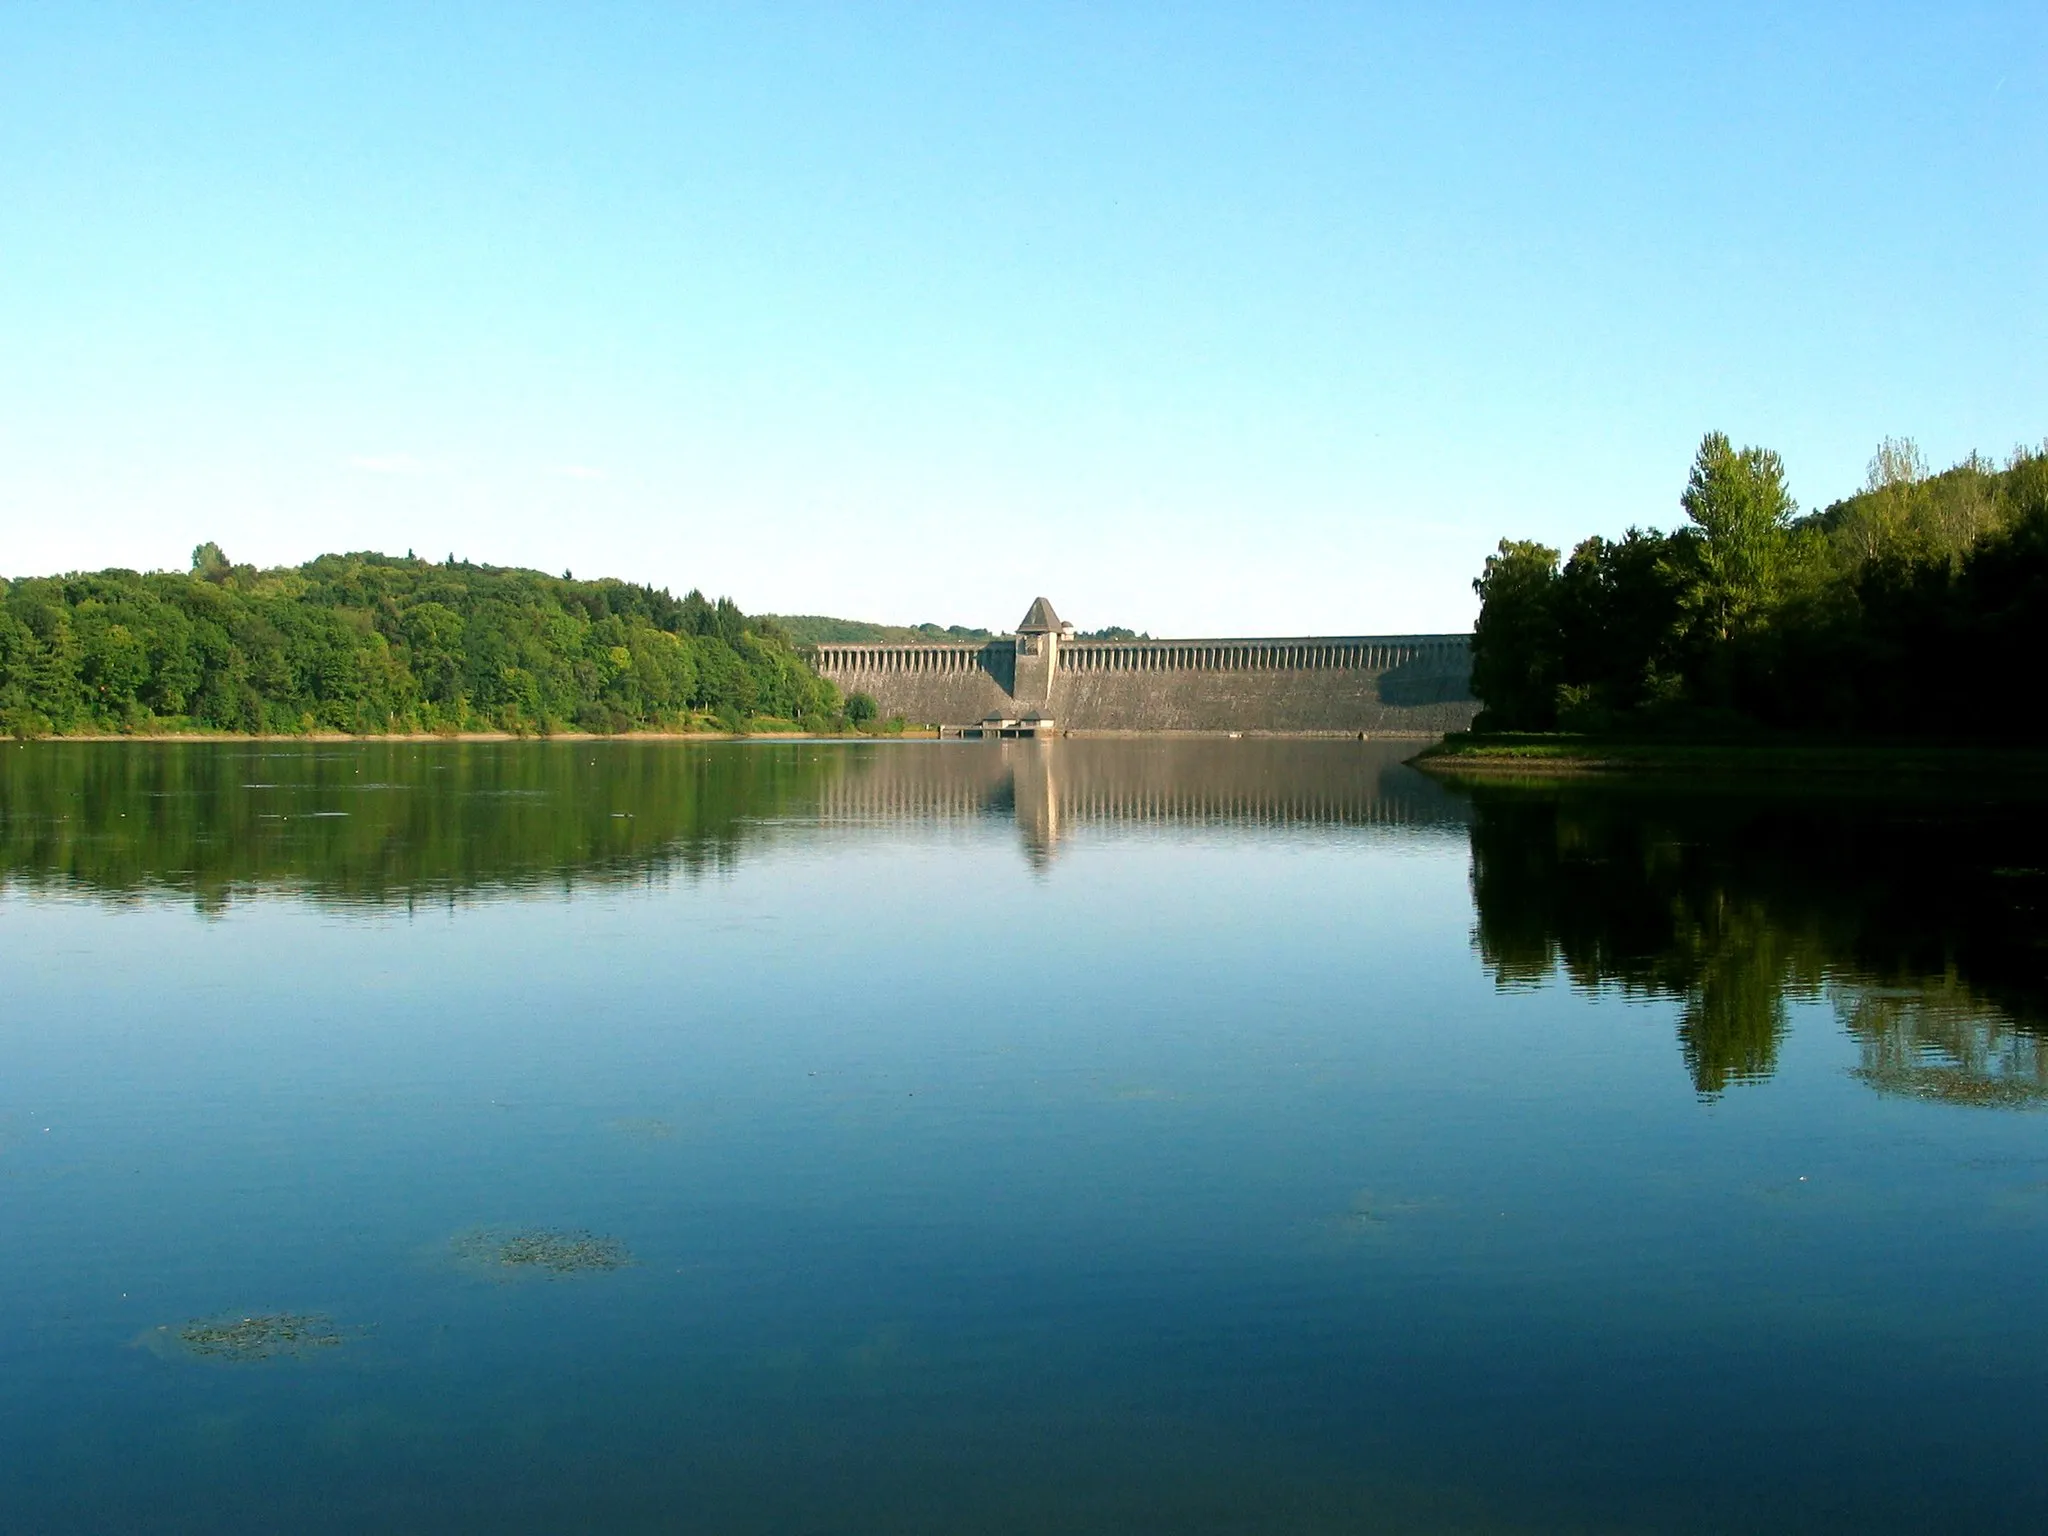 Photo showing: The dam of the Möhne Reservoir, Germany.